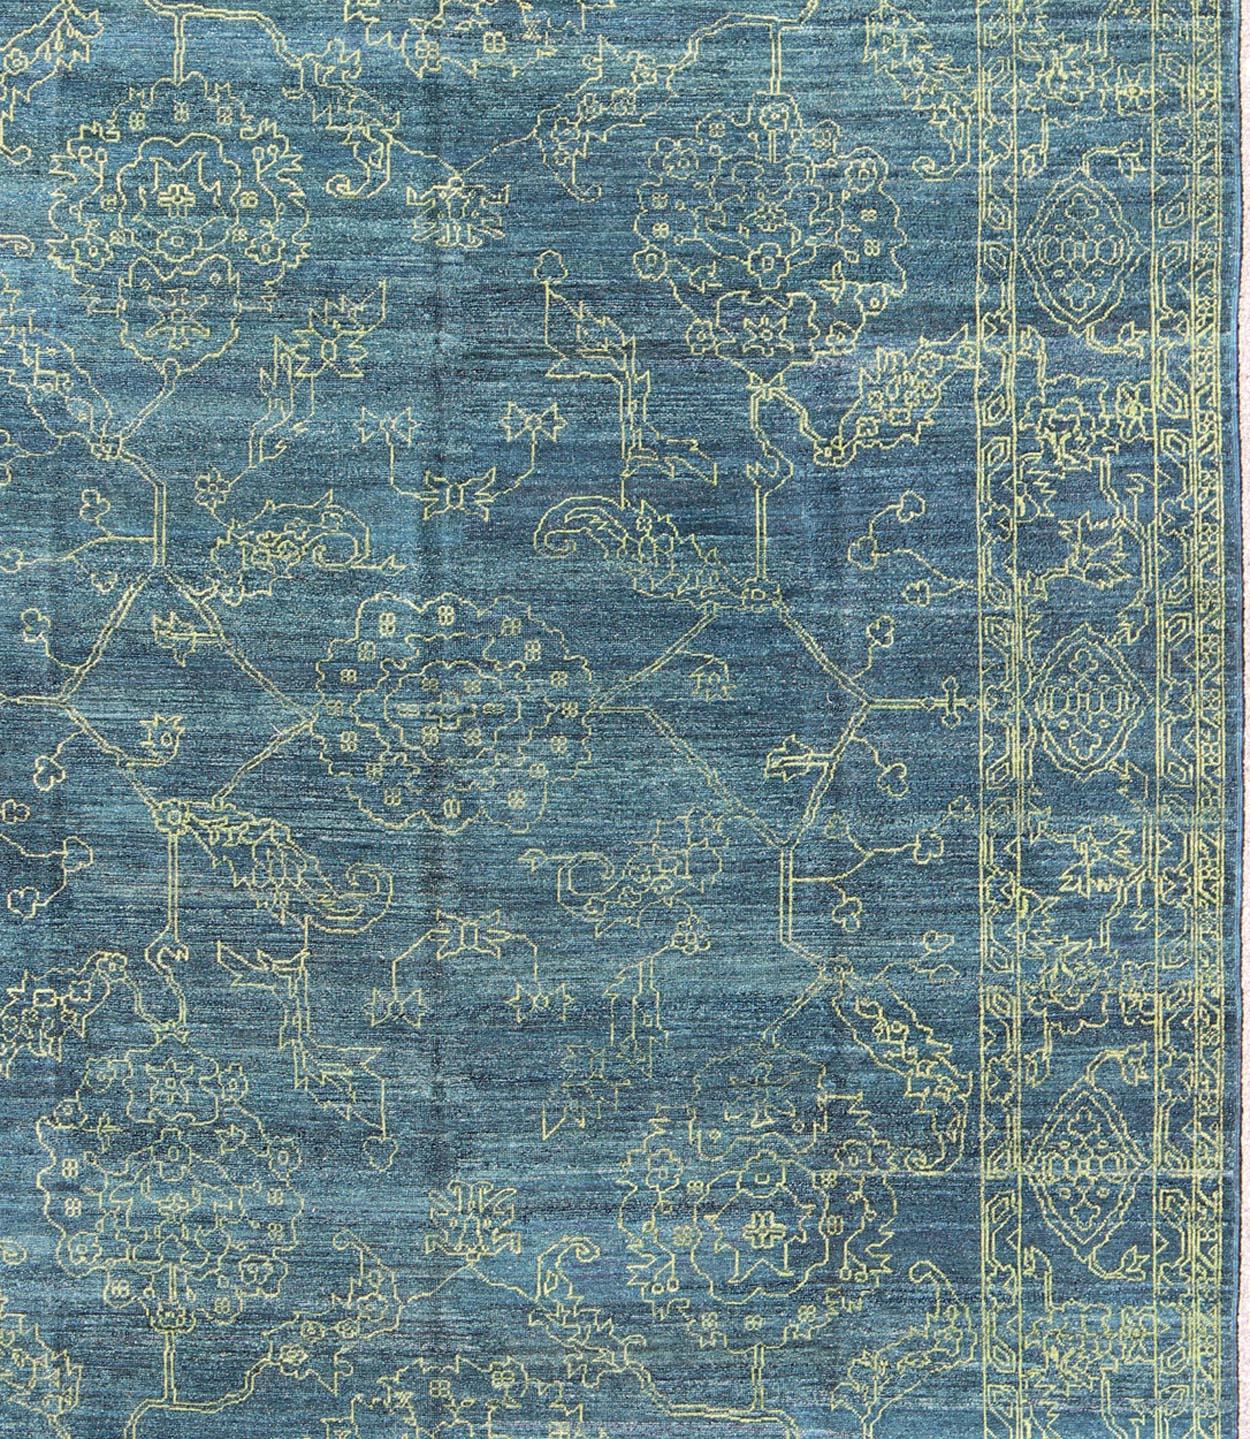 Modern rug with Transitional Design, rug AN-118152, country of origin / type: Turkey / Modern, circa Early-21st Century.

Measures: 9'0 x 11'11.

This finely hand knotted transitional design rug features a beautiful floral design rendered in